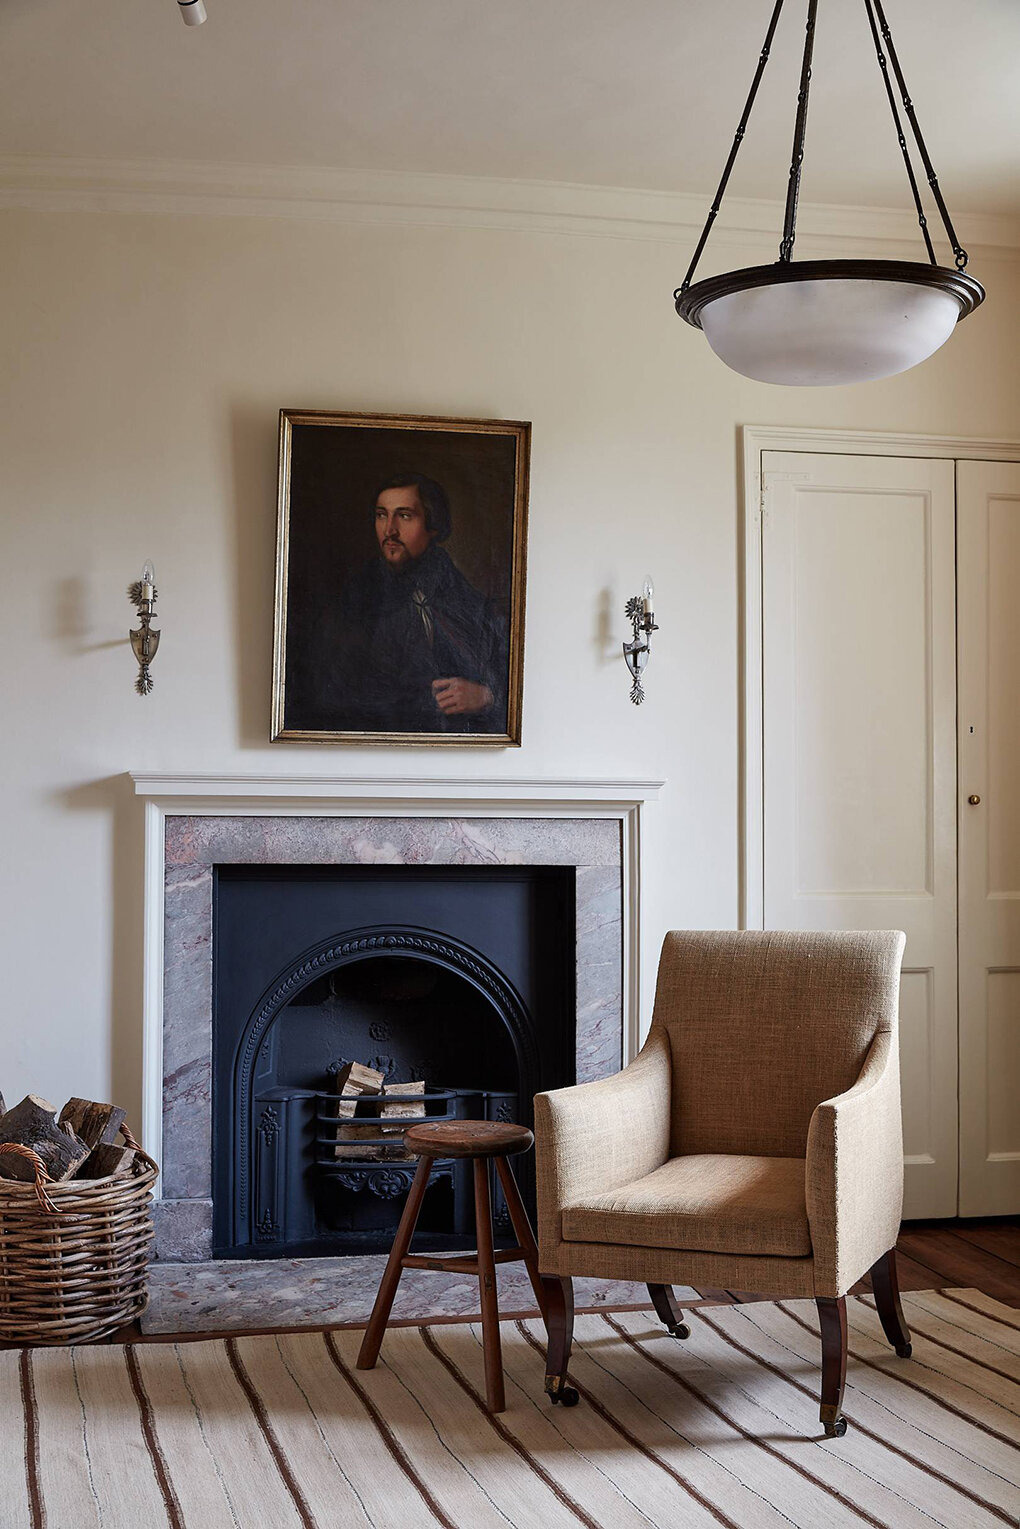 A 17th-Century House in London by Rose Uniack